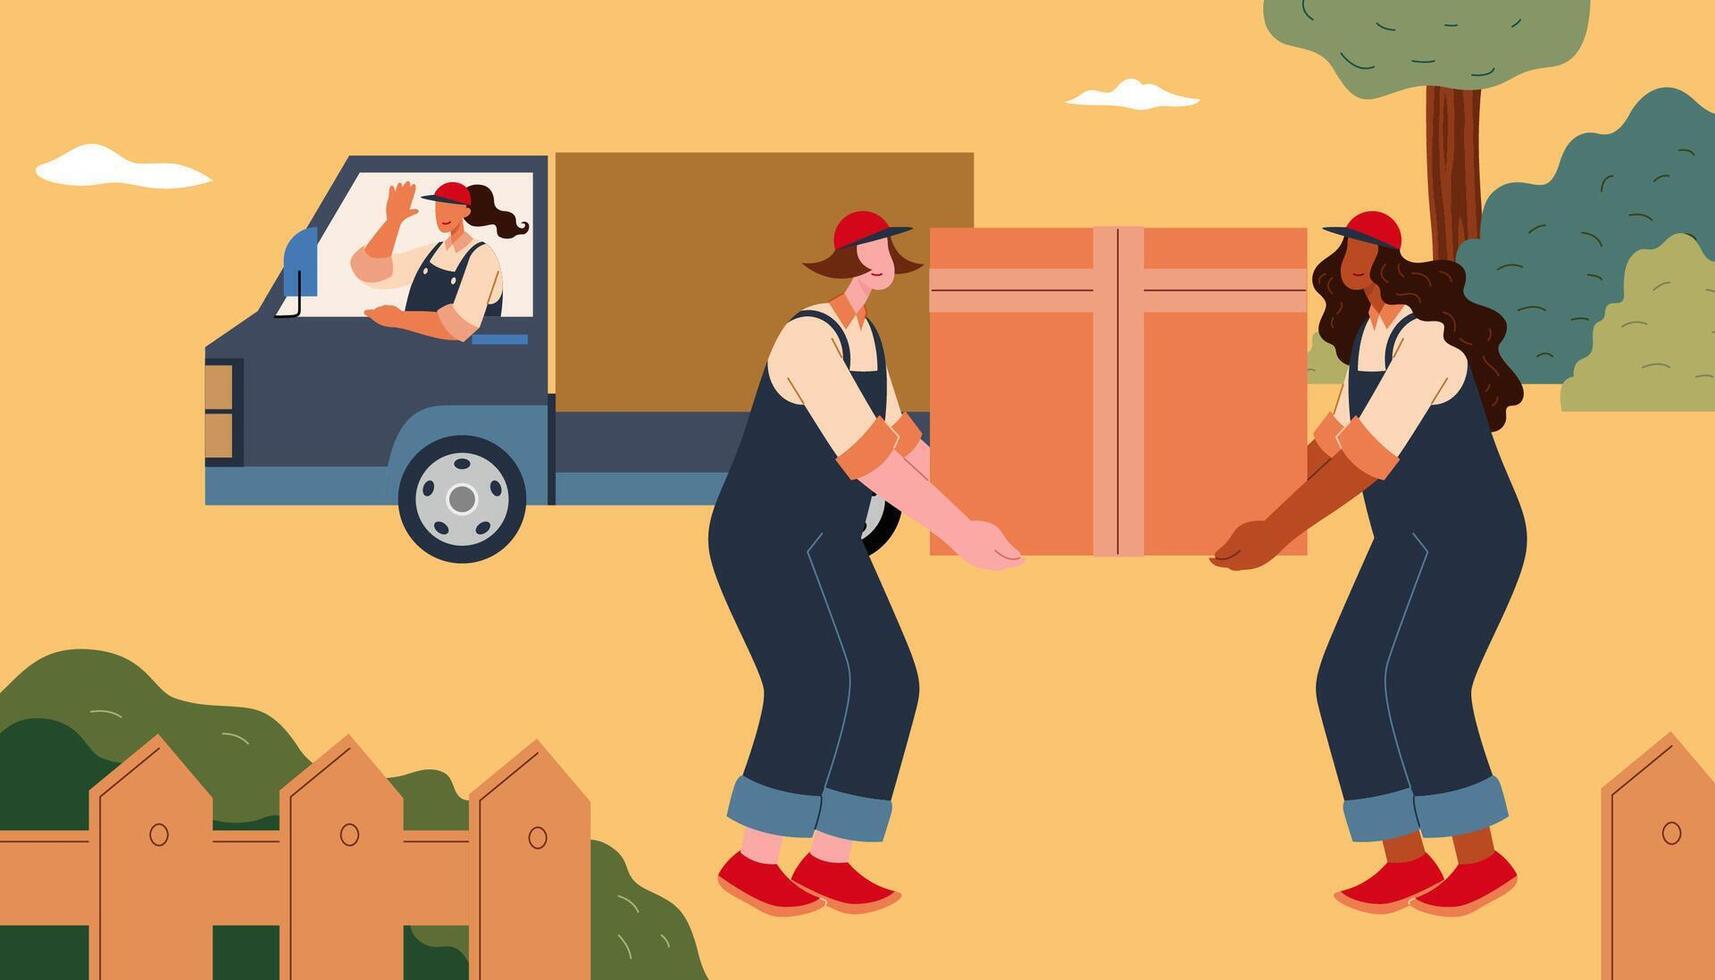 Women couriers with a large parcel. Flat style illustration of two female workers carrying a big parcel box from the courier van to recipient. Concept of women at work vector